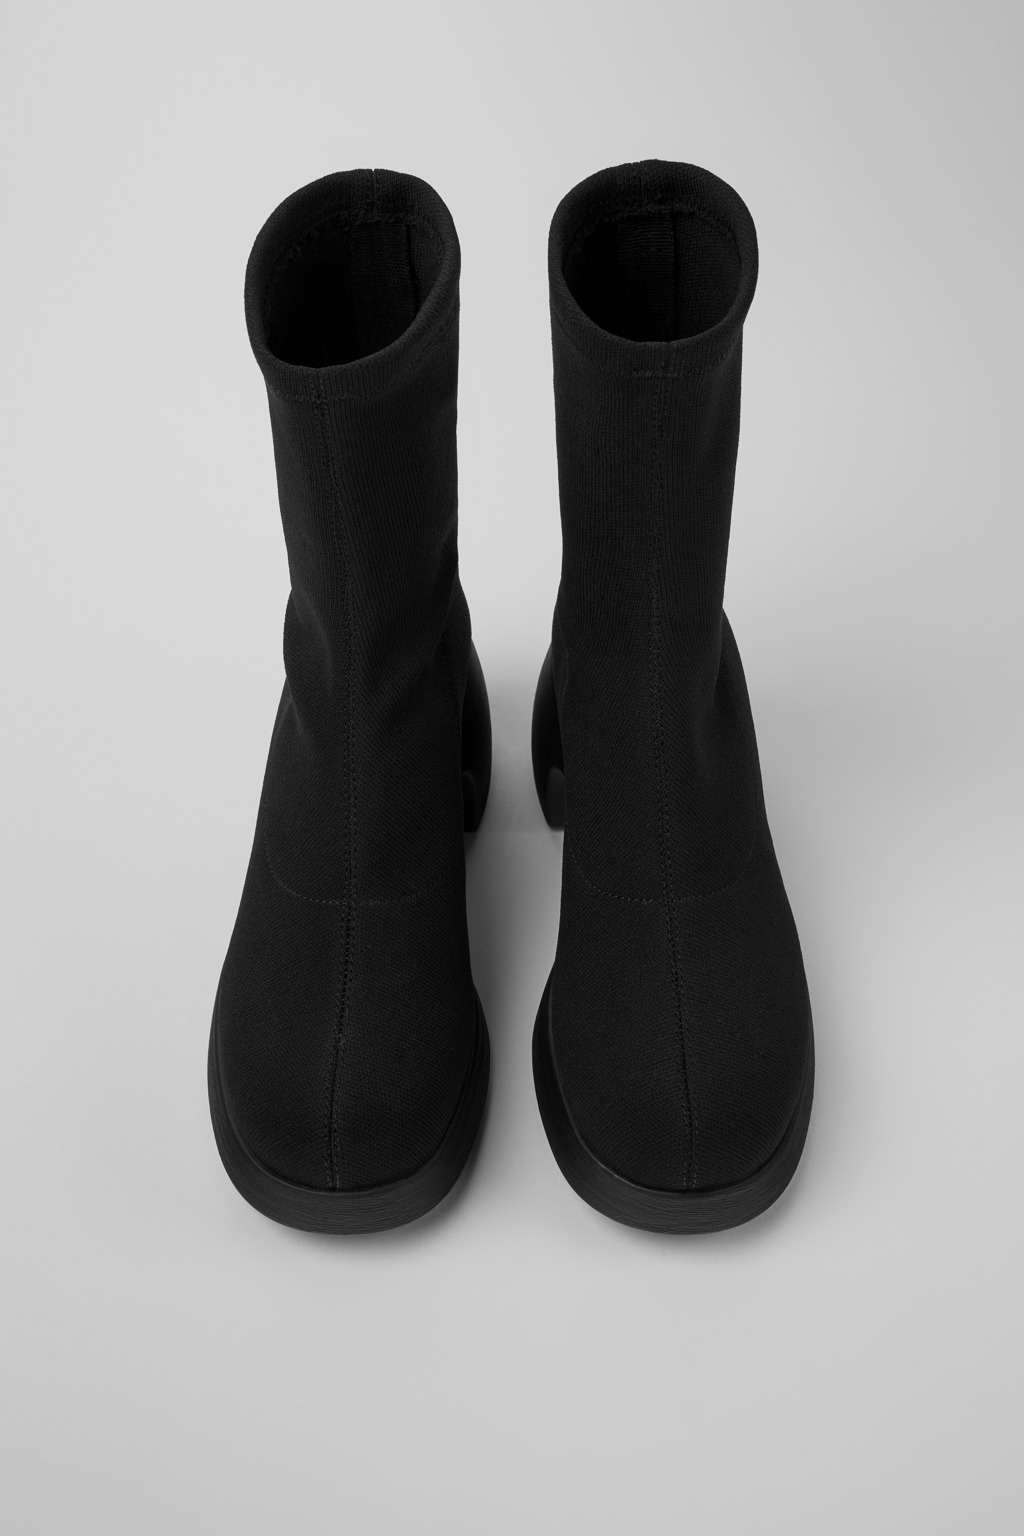 Thelma Black Boots for Women - Fall/Winter collection - Camper 